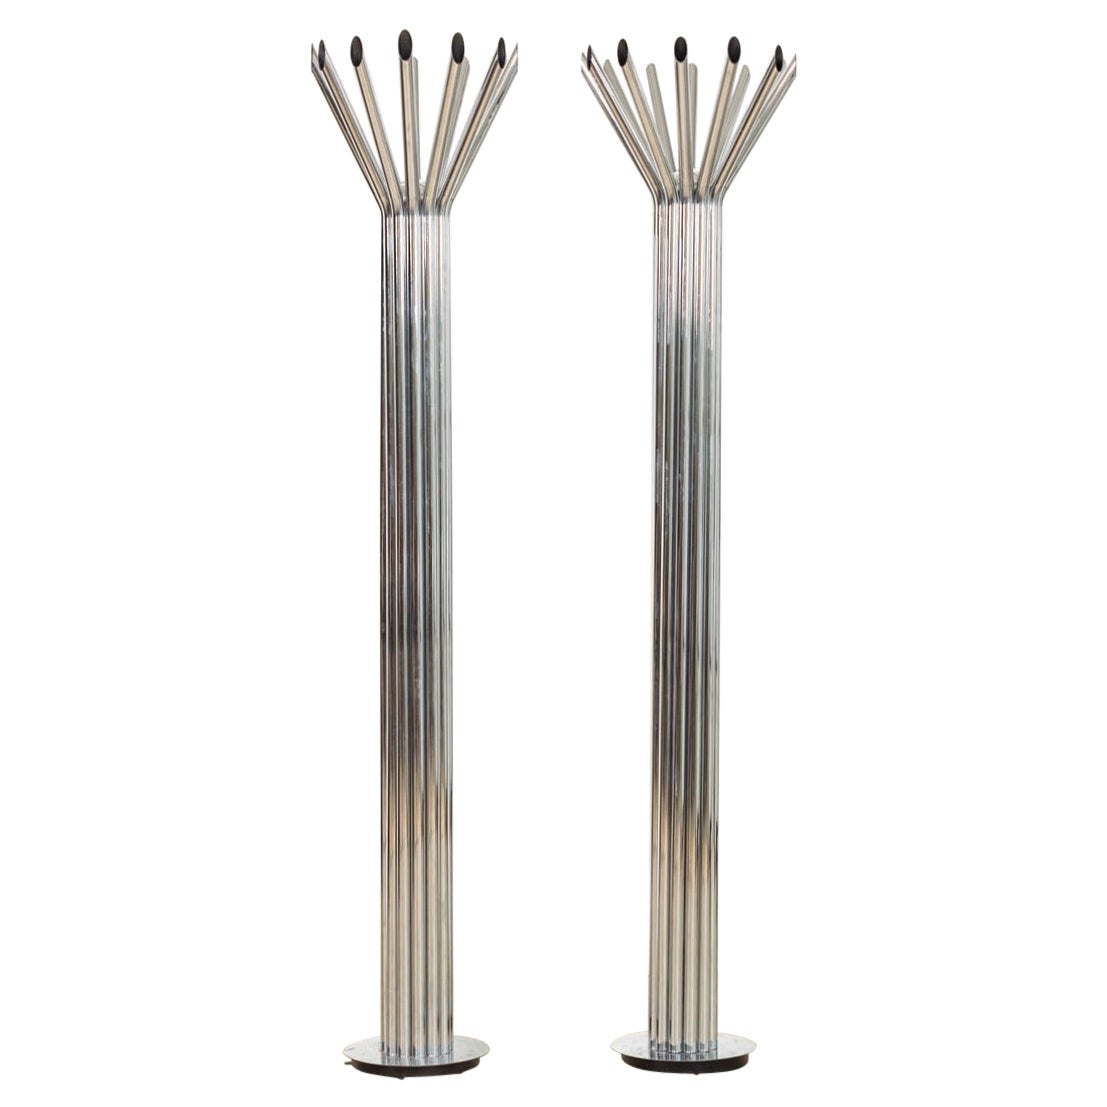 Midcentury Chrome Floor Lamp by George Kovacs 'Attr.' Matching Pair Available For Sale